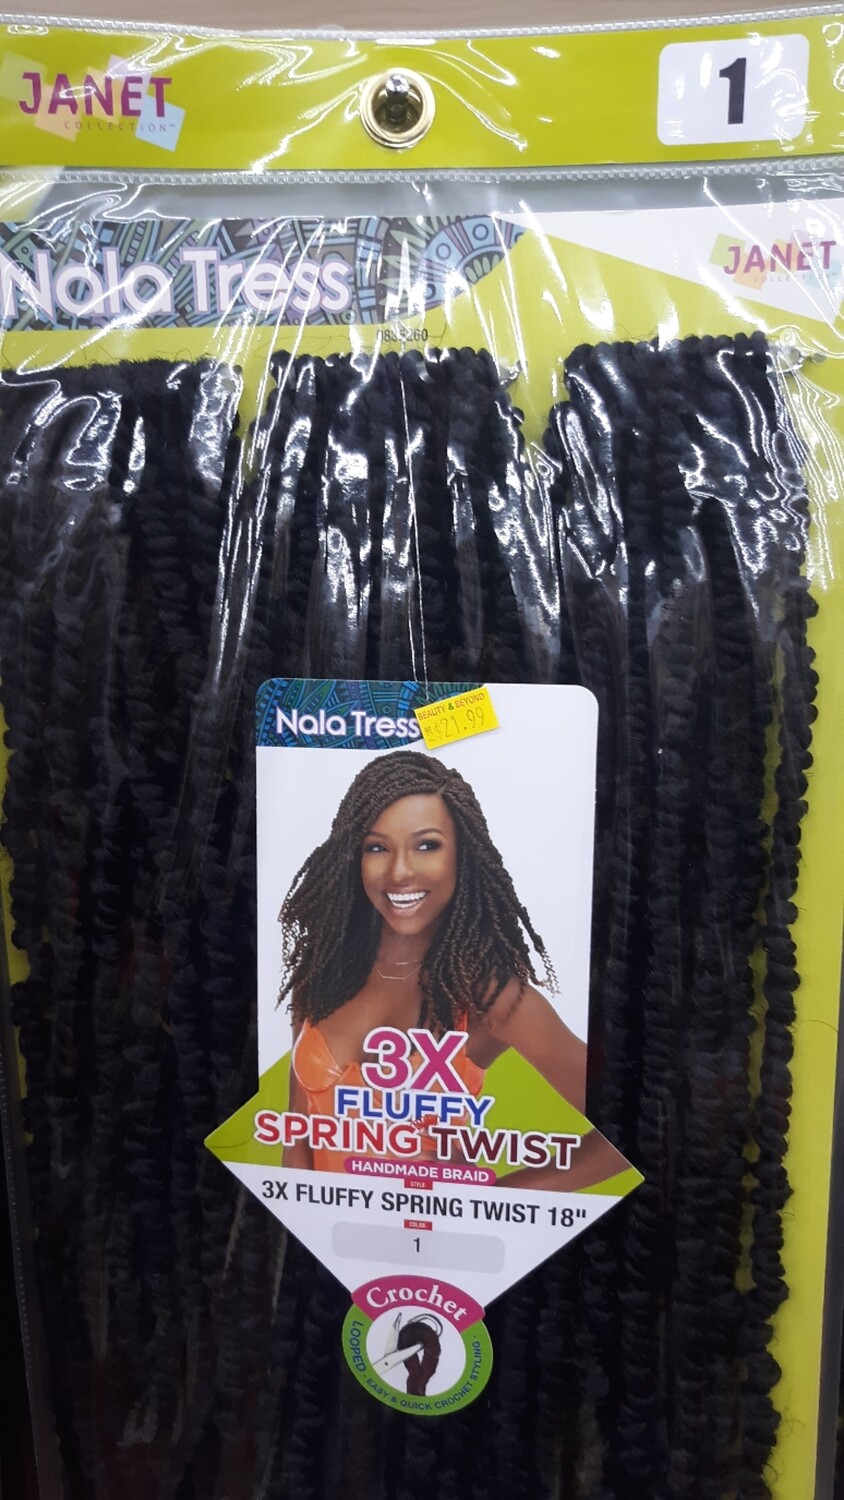 Janet Collection 3x Fluffy Spring Twist 18" (1)